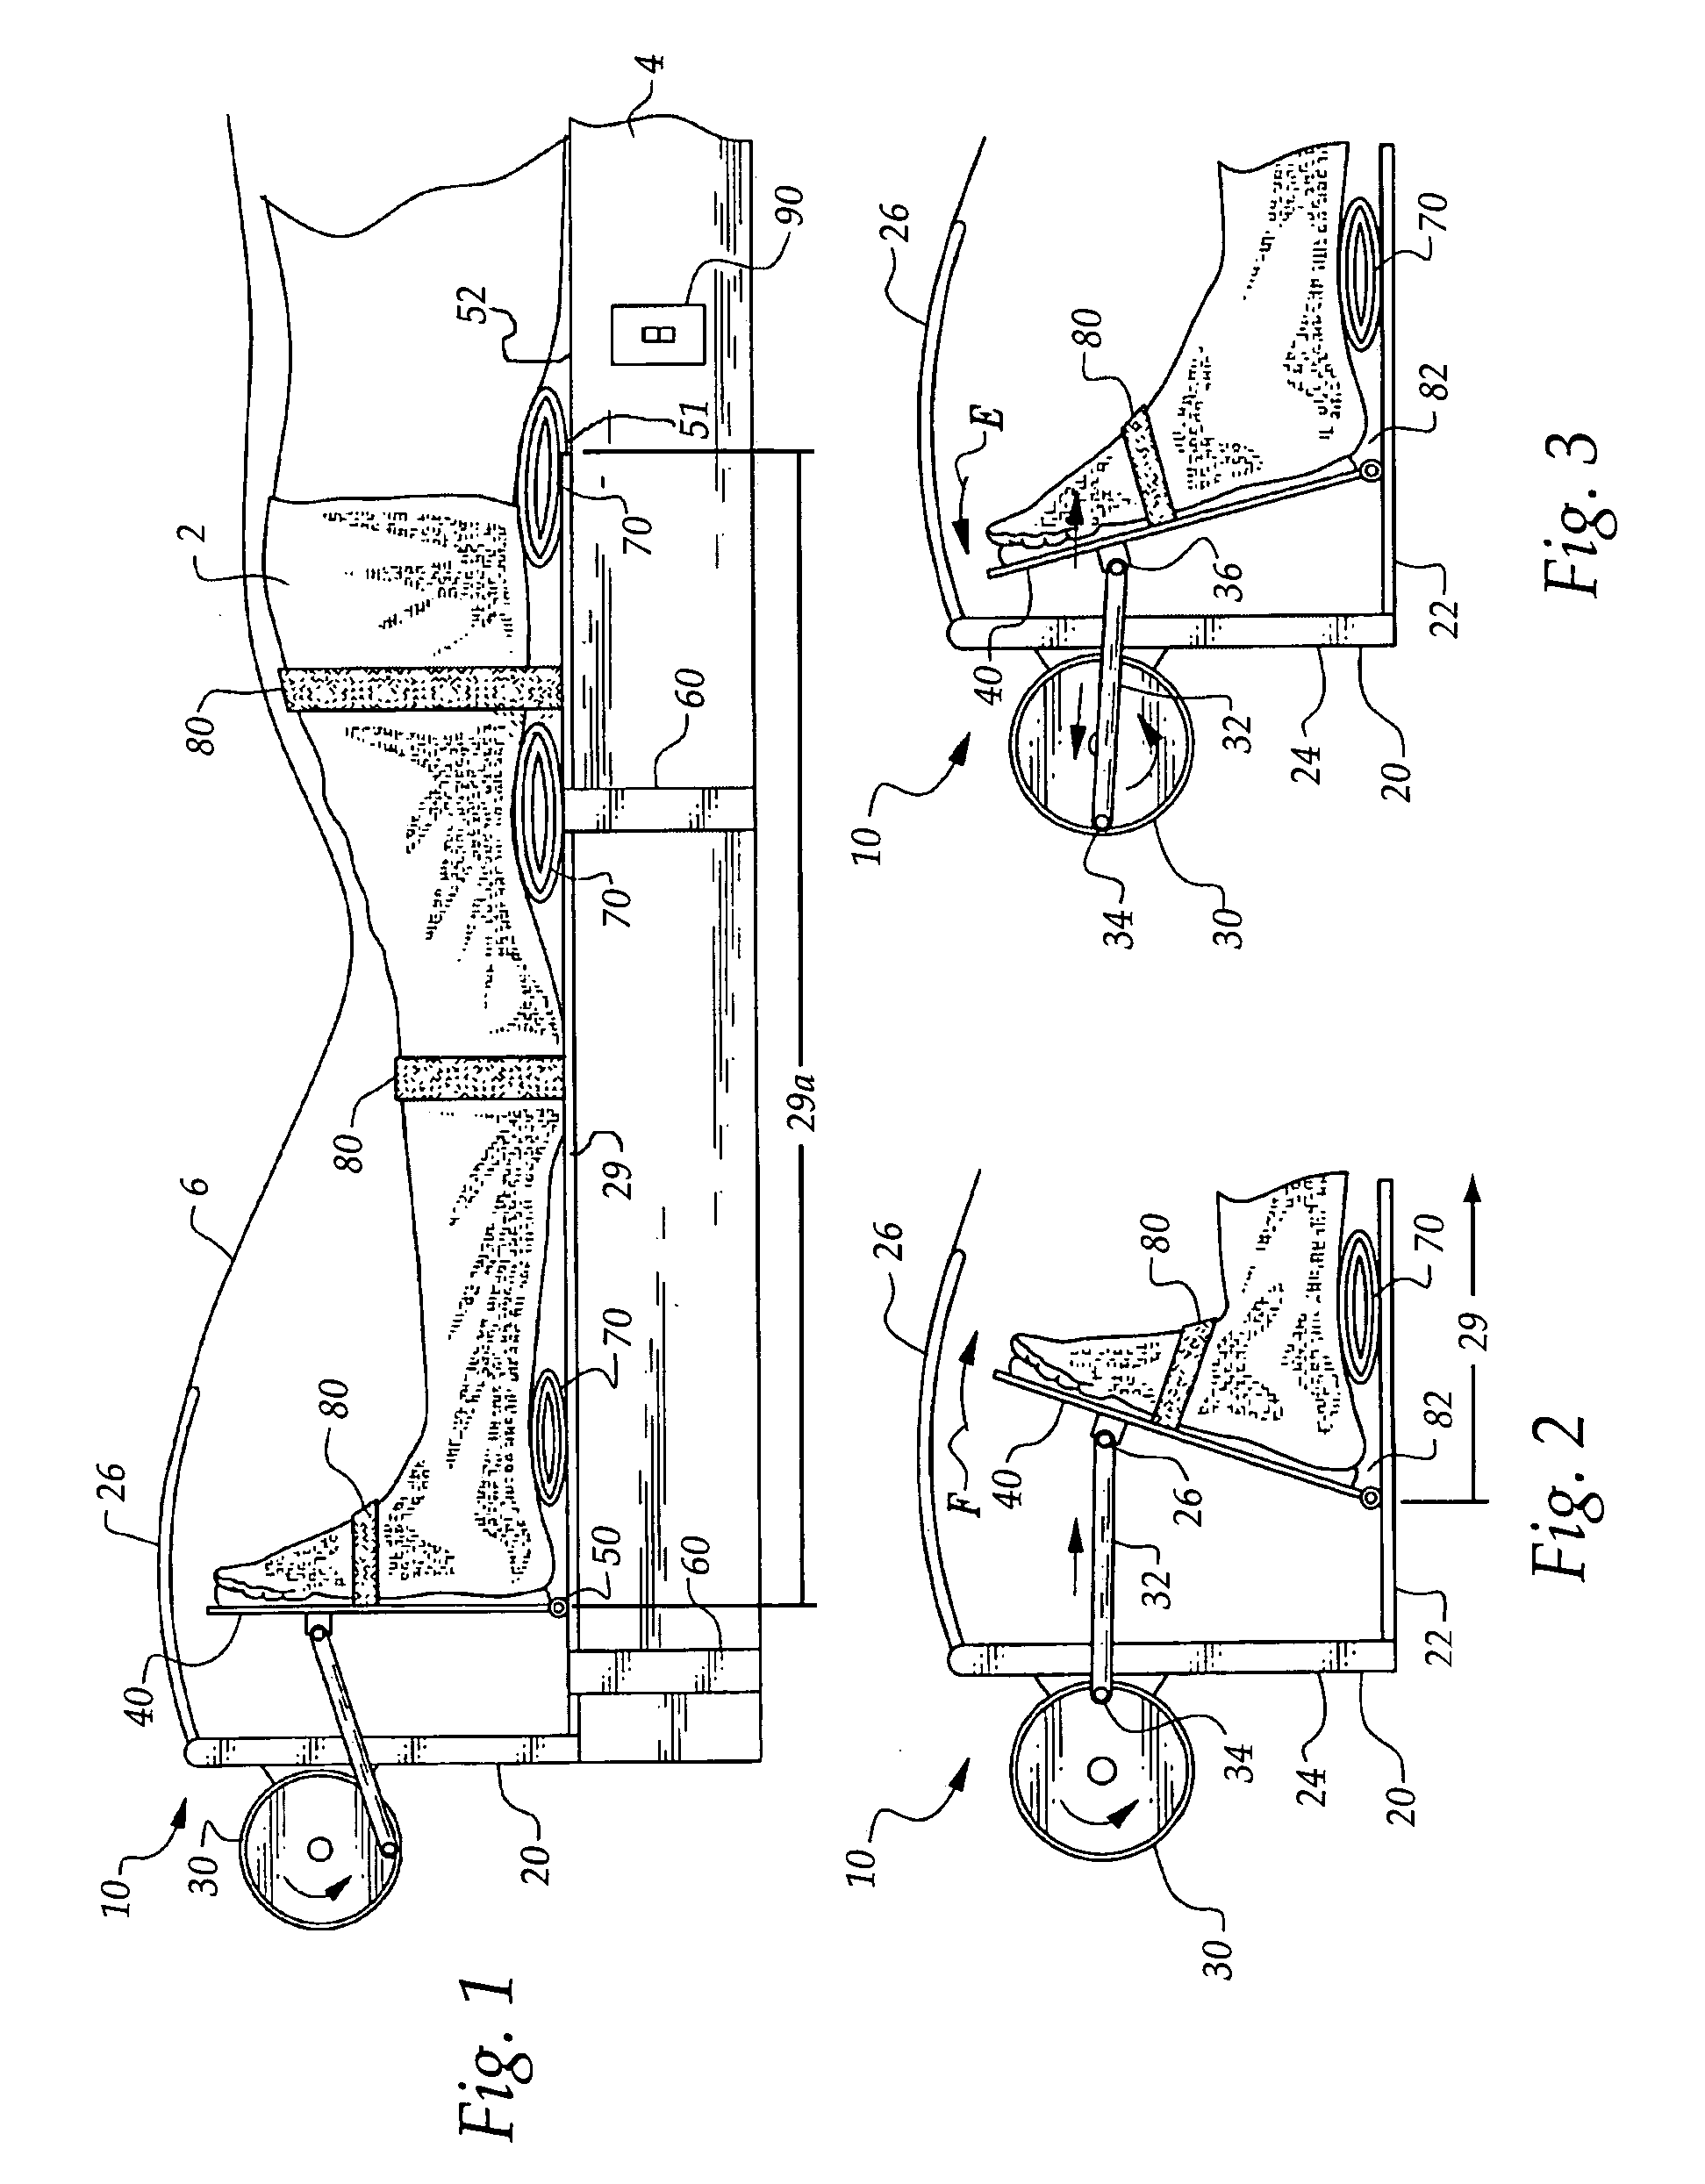 Lower extremity passive muscle manipulation device and method